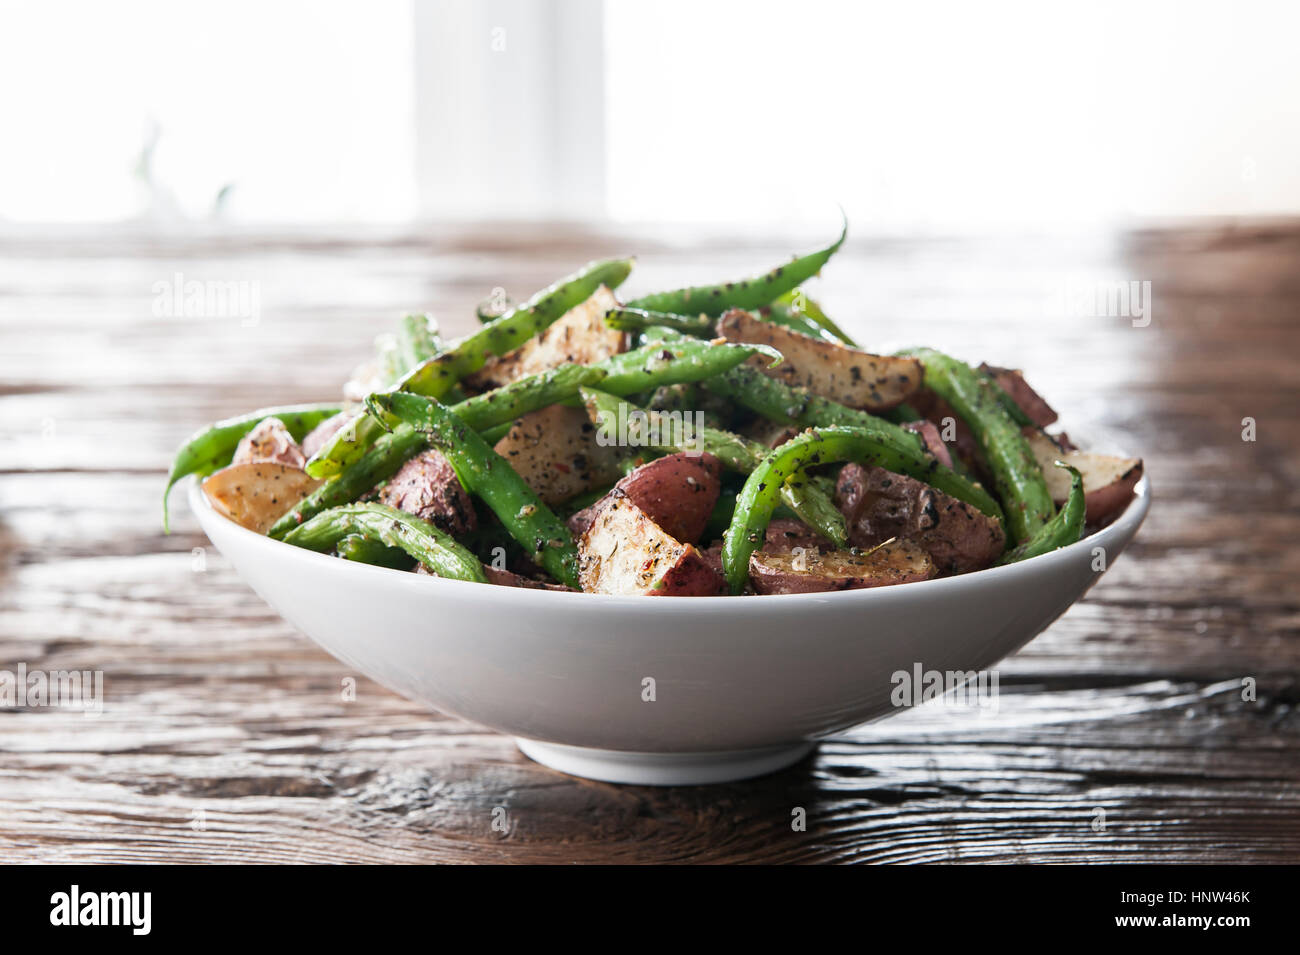 Bowl of green beans and roasted potatoes Stock Photo